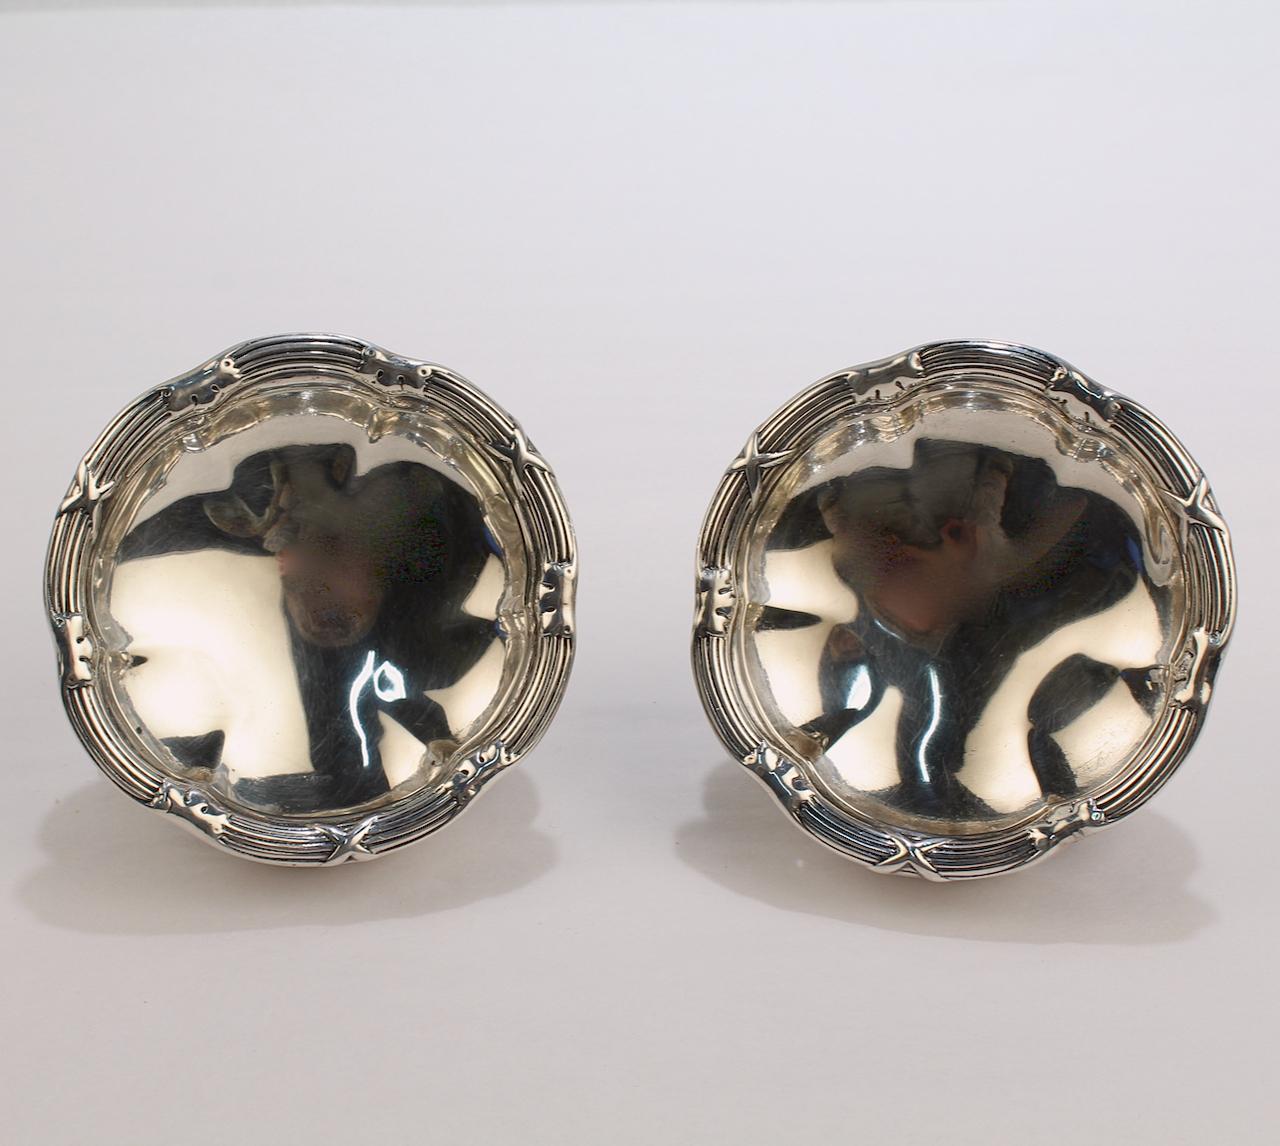 Pair of Crested English Victorian Sterling Silver Salt Cellars by Hunt & Roskell For Sale 3